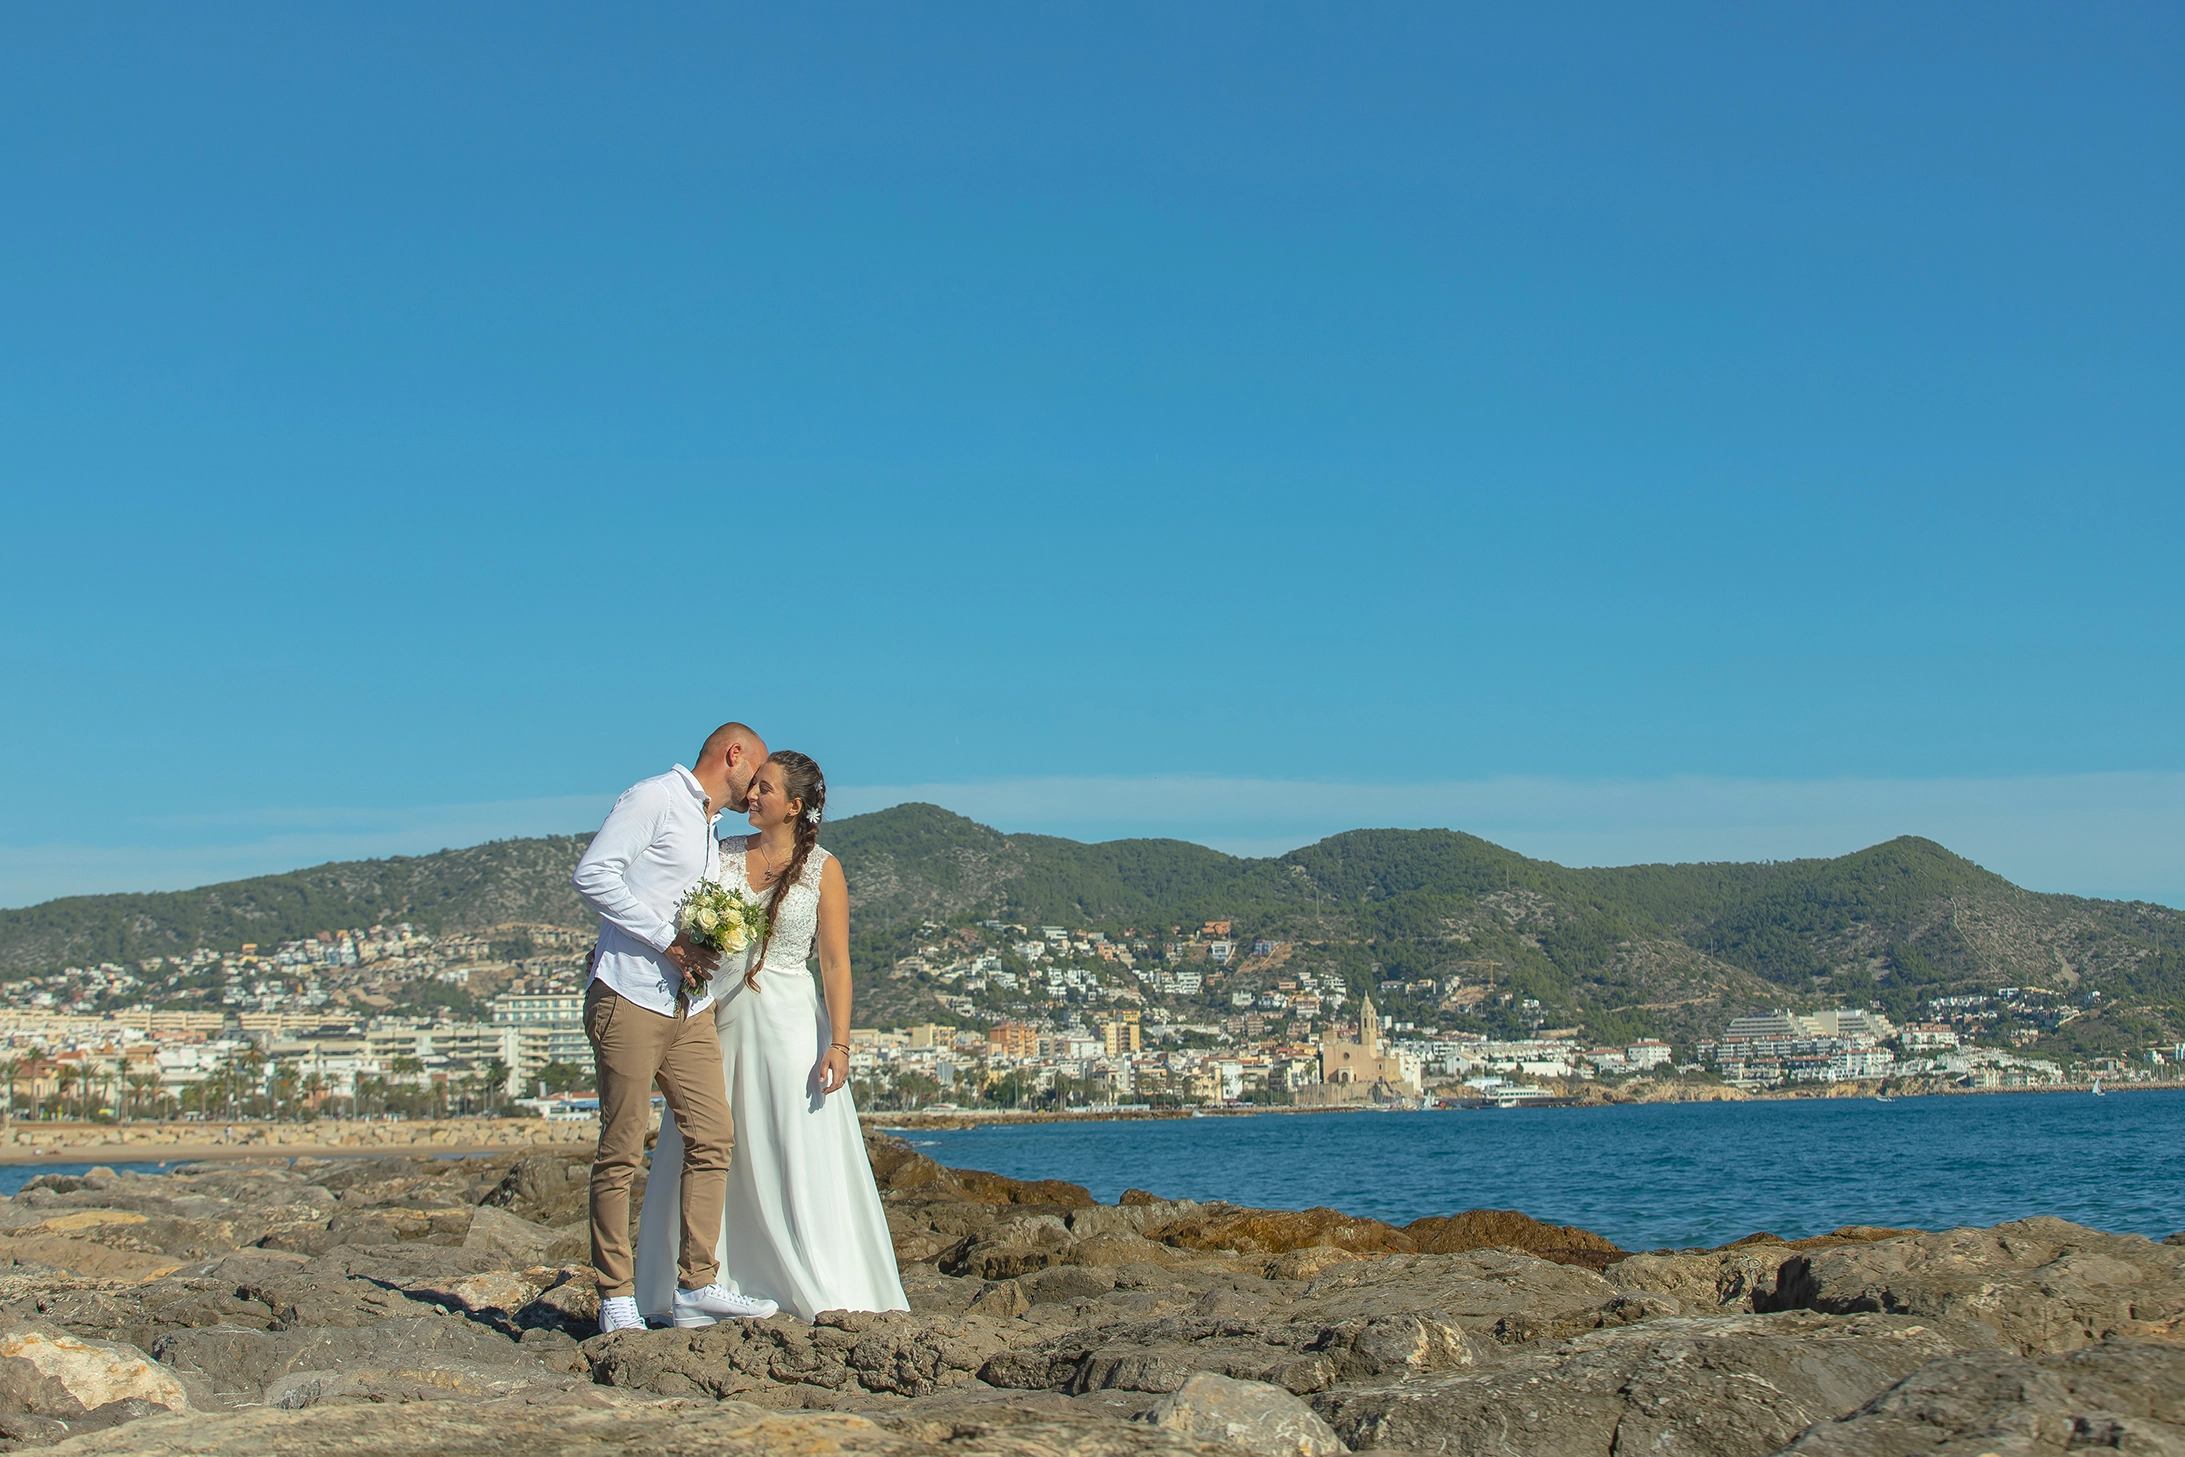 the groom kiss the bride on the beach in Sitges